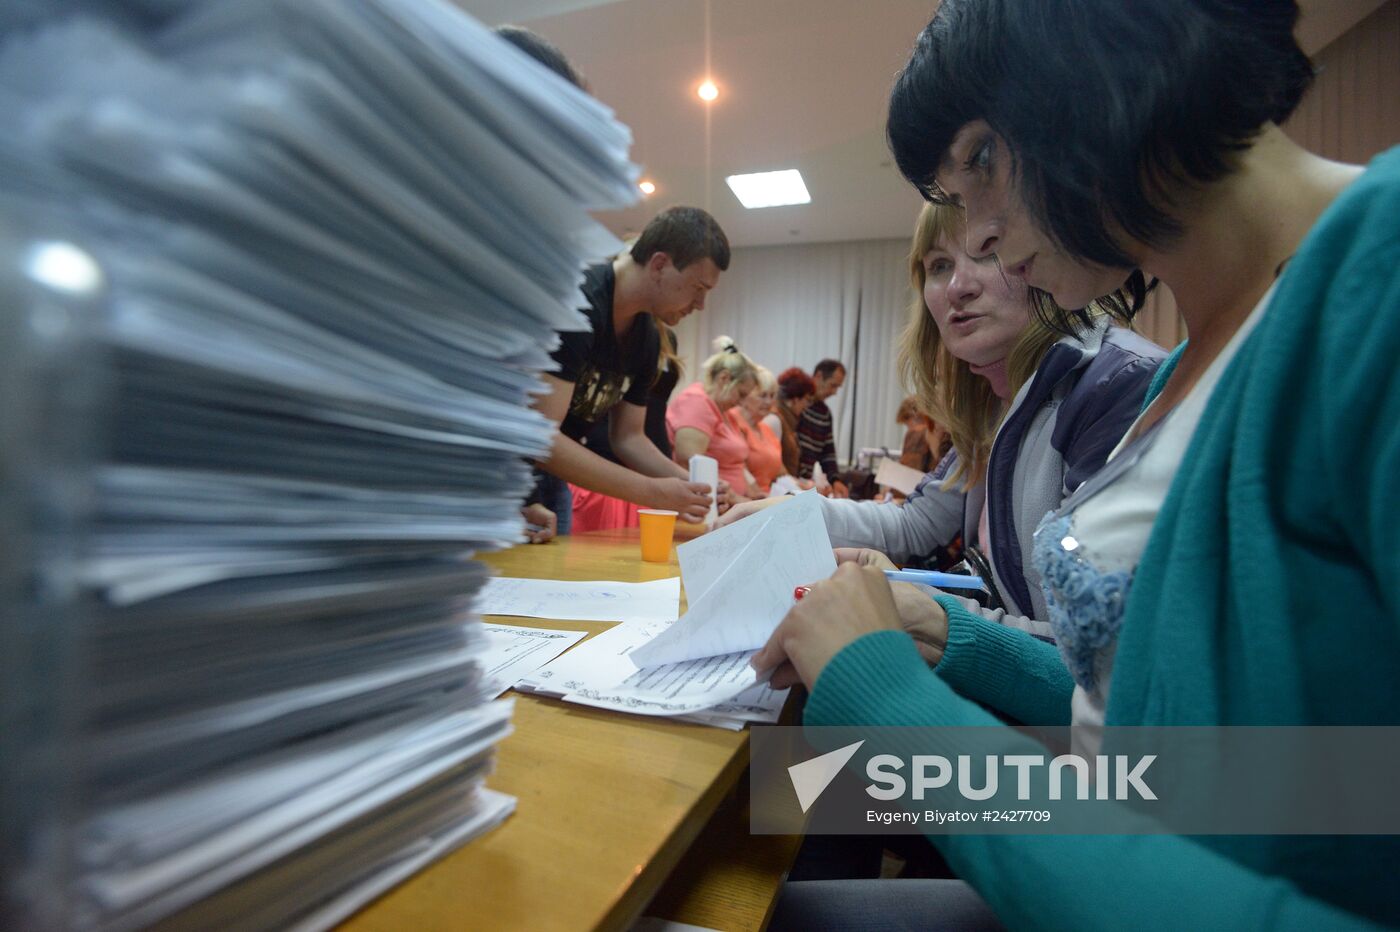 Counting votes after referendum on status of southeastern Ukraine